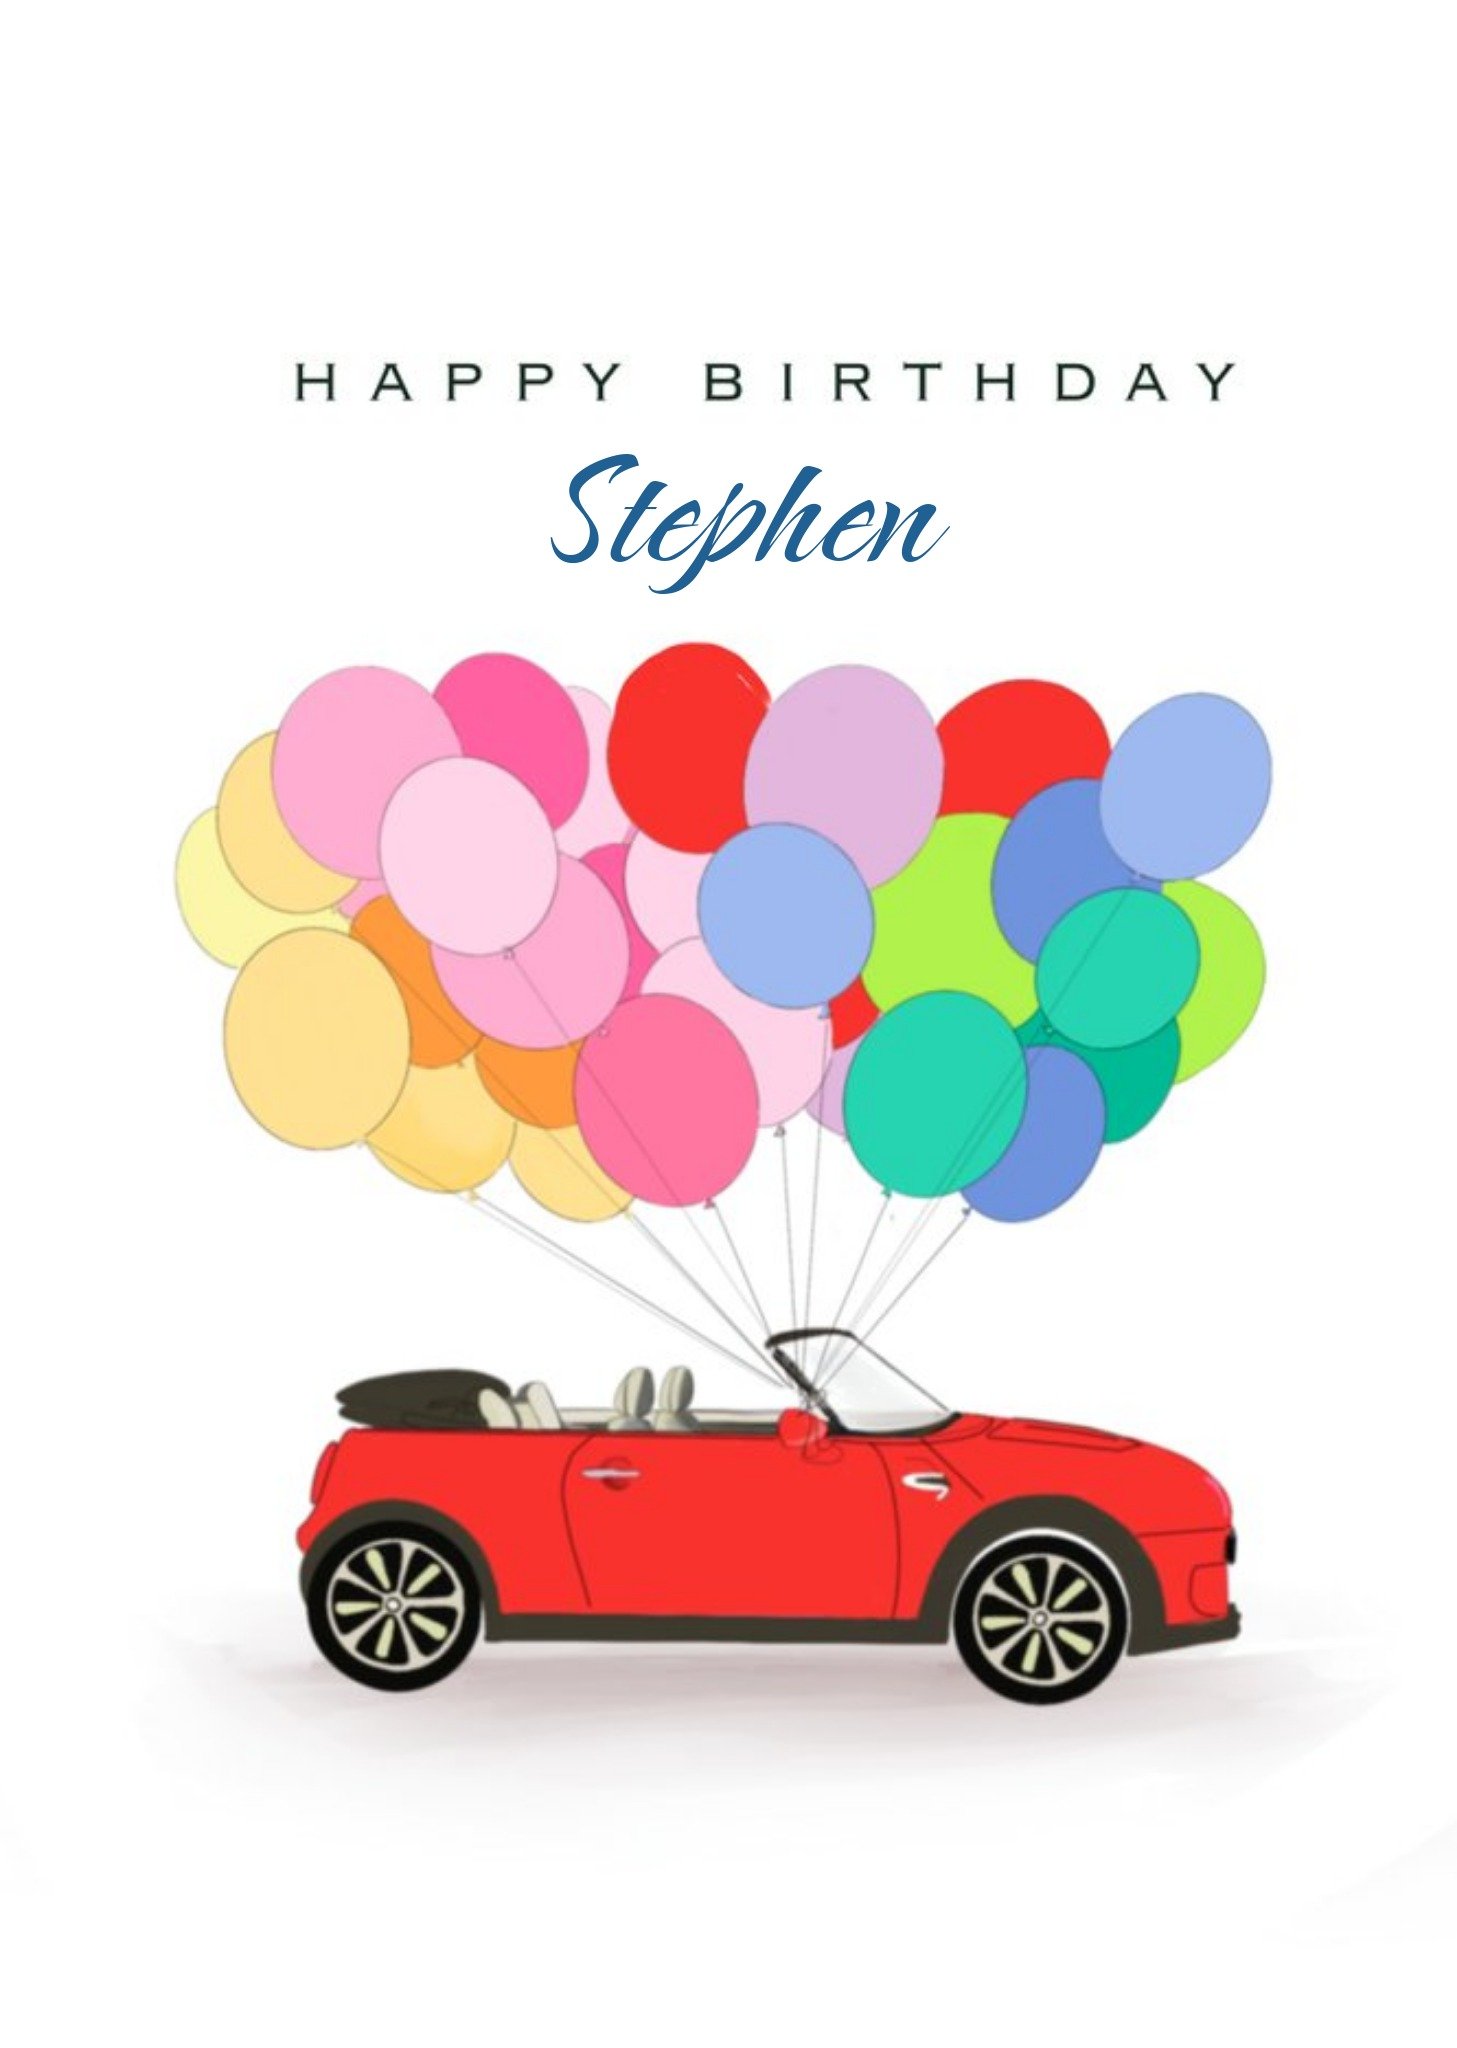 Moonpig Illustrated Red Convertible Car And Balloons Birthday Card, Large